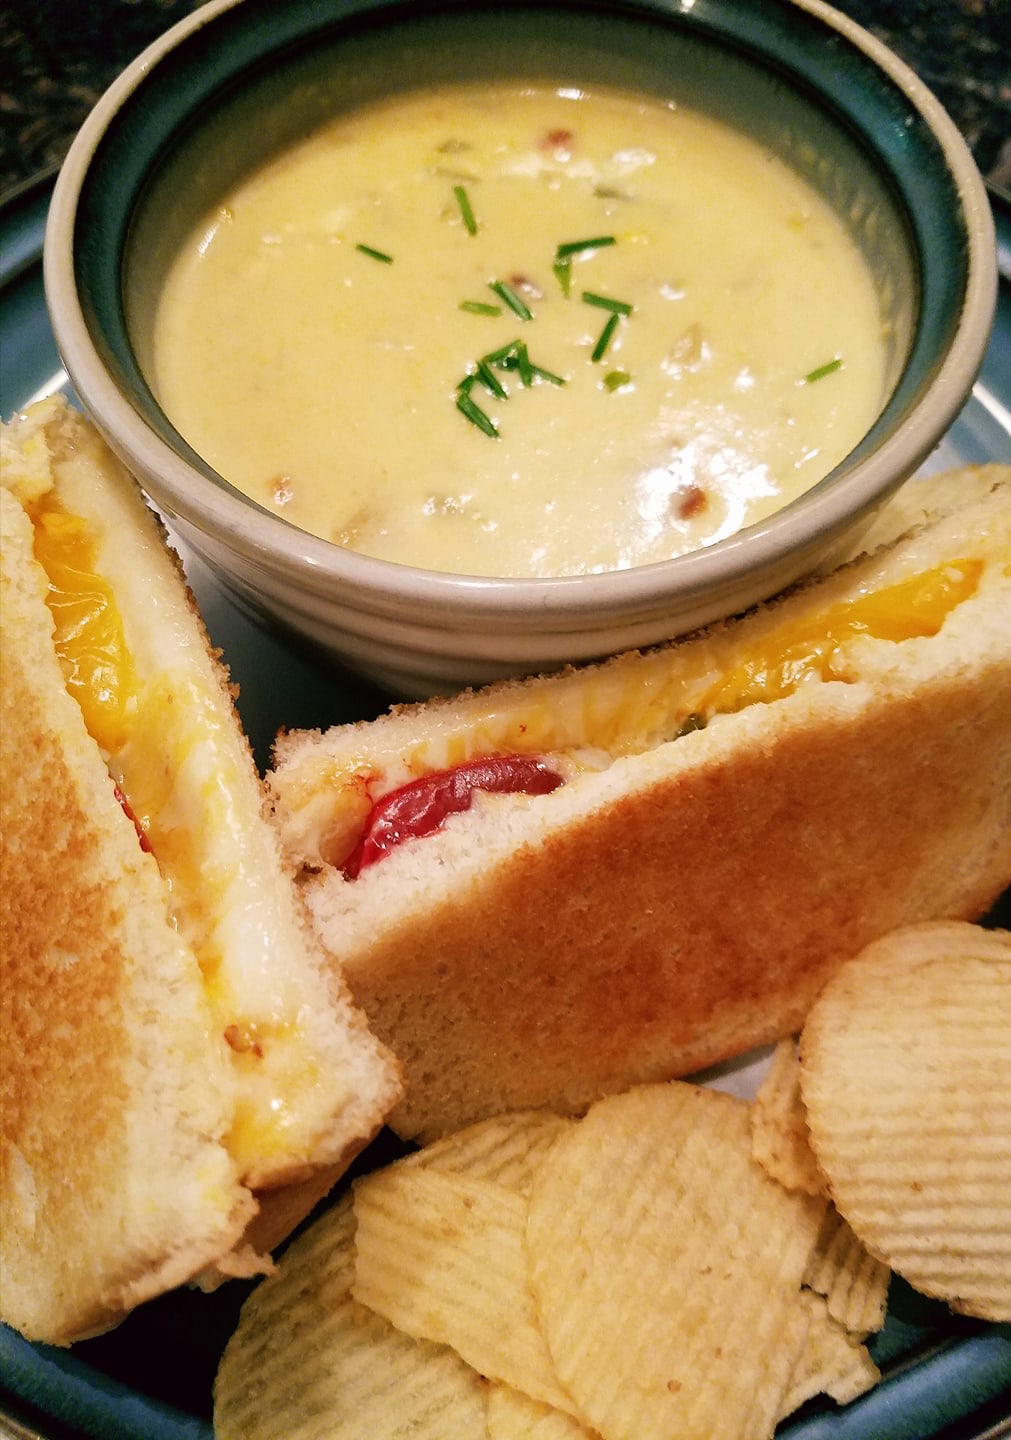 Grilled Cheese with Heirloom Tomatoes and Jalapeno Corn Chowder